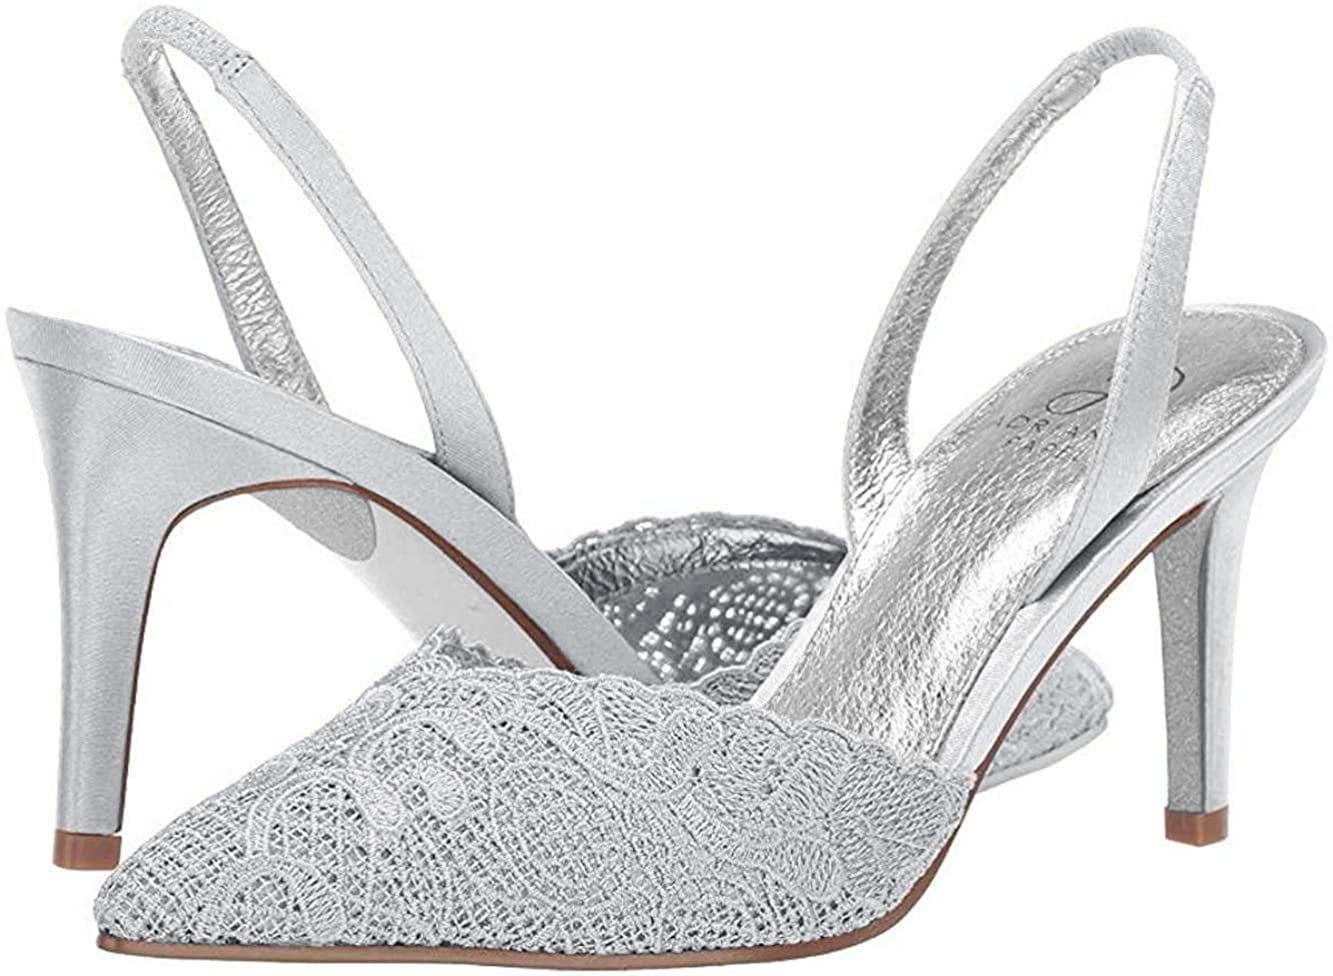 adrianna papell silver heels